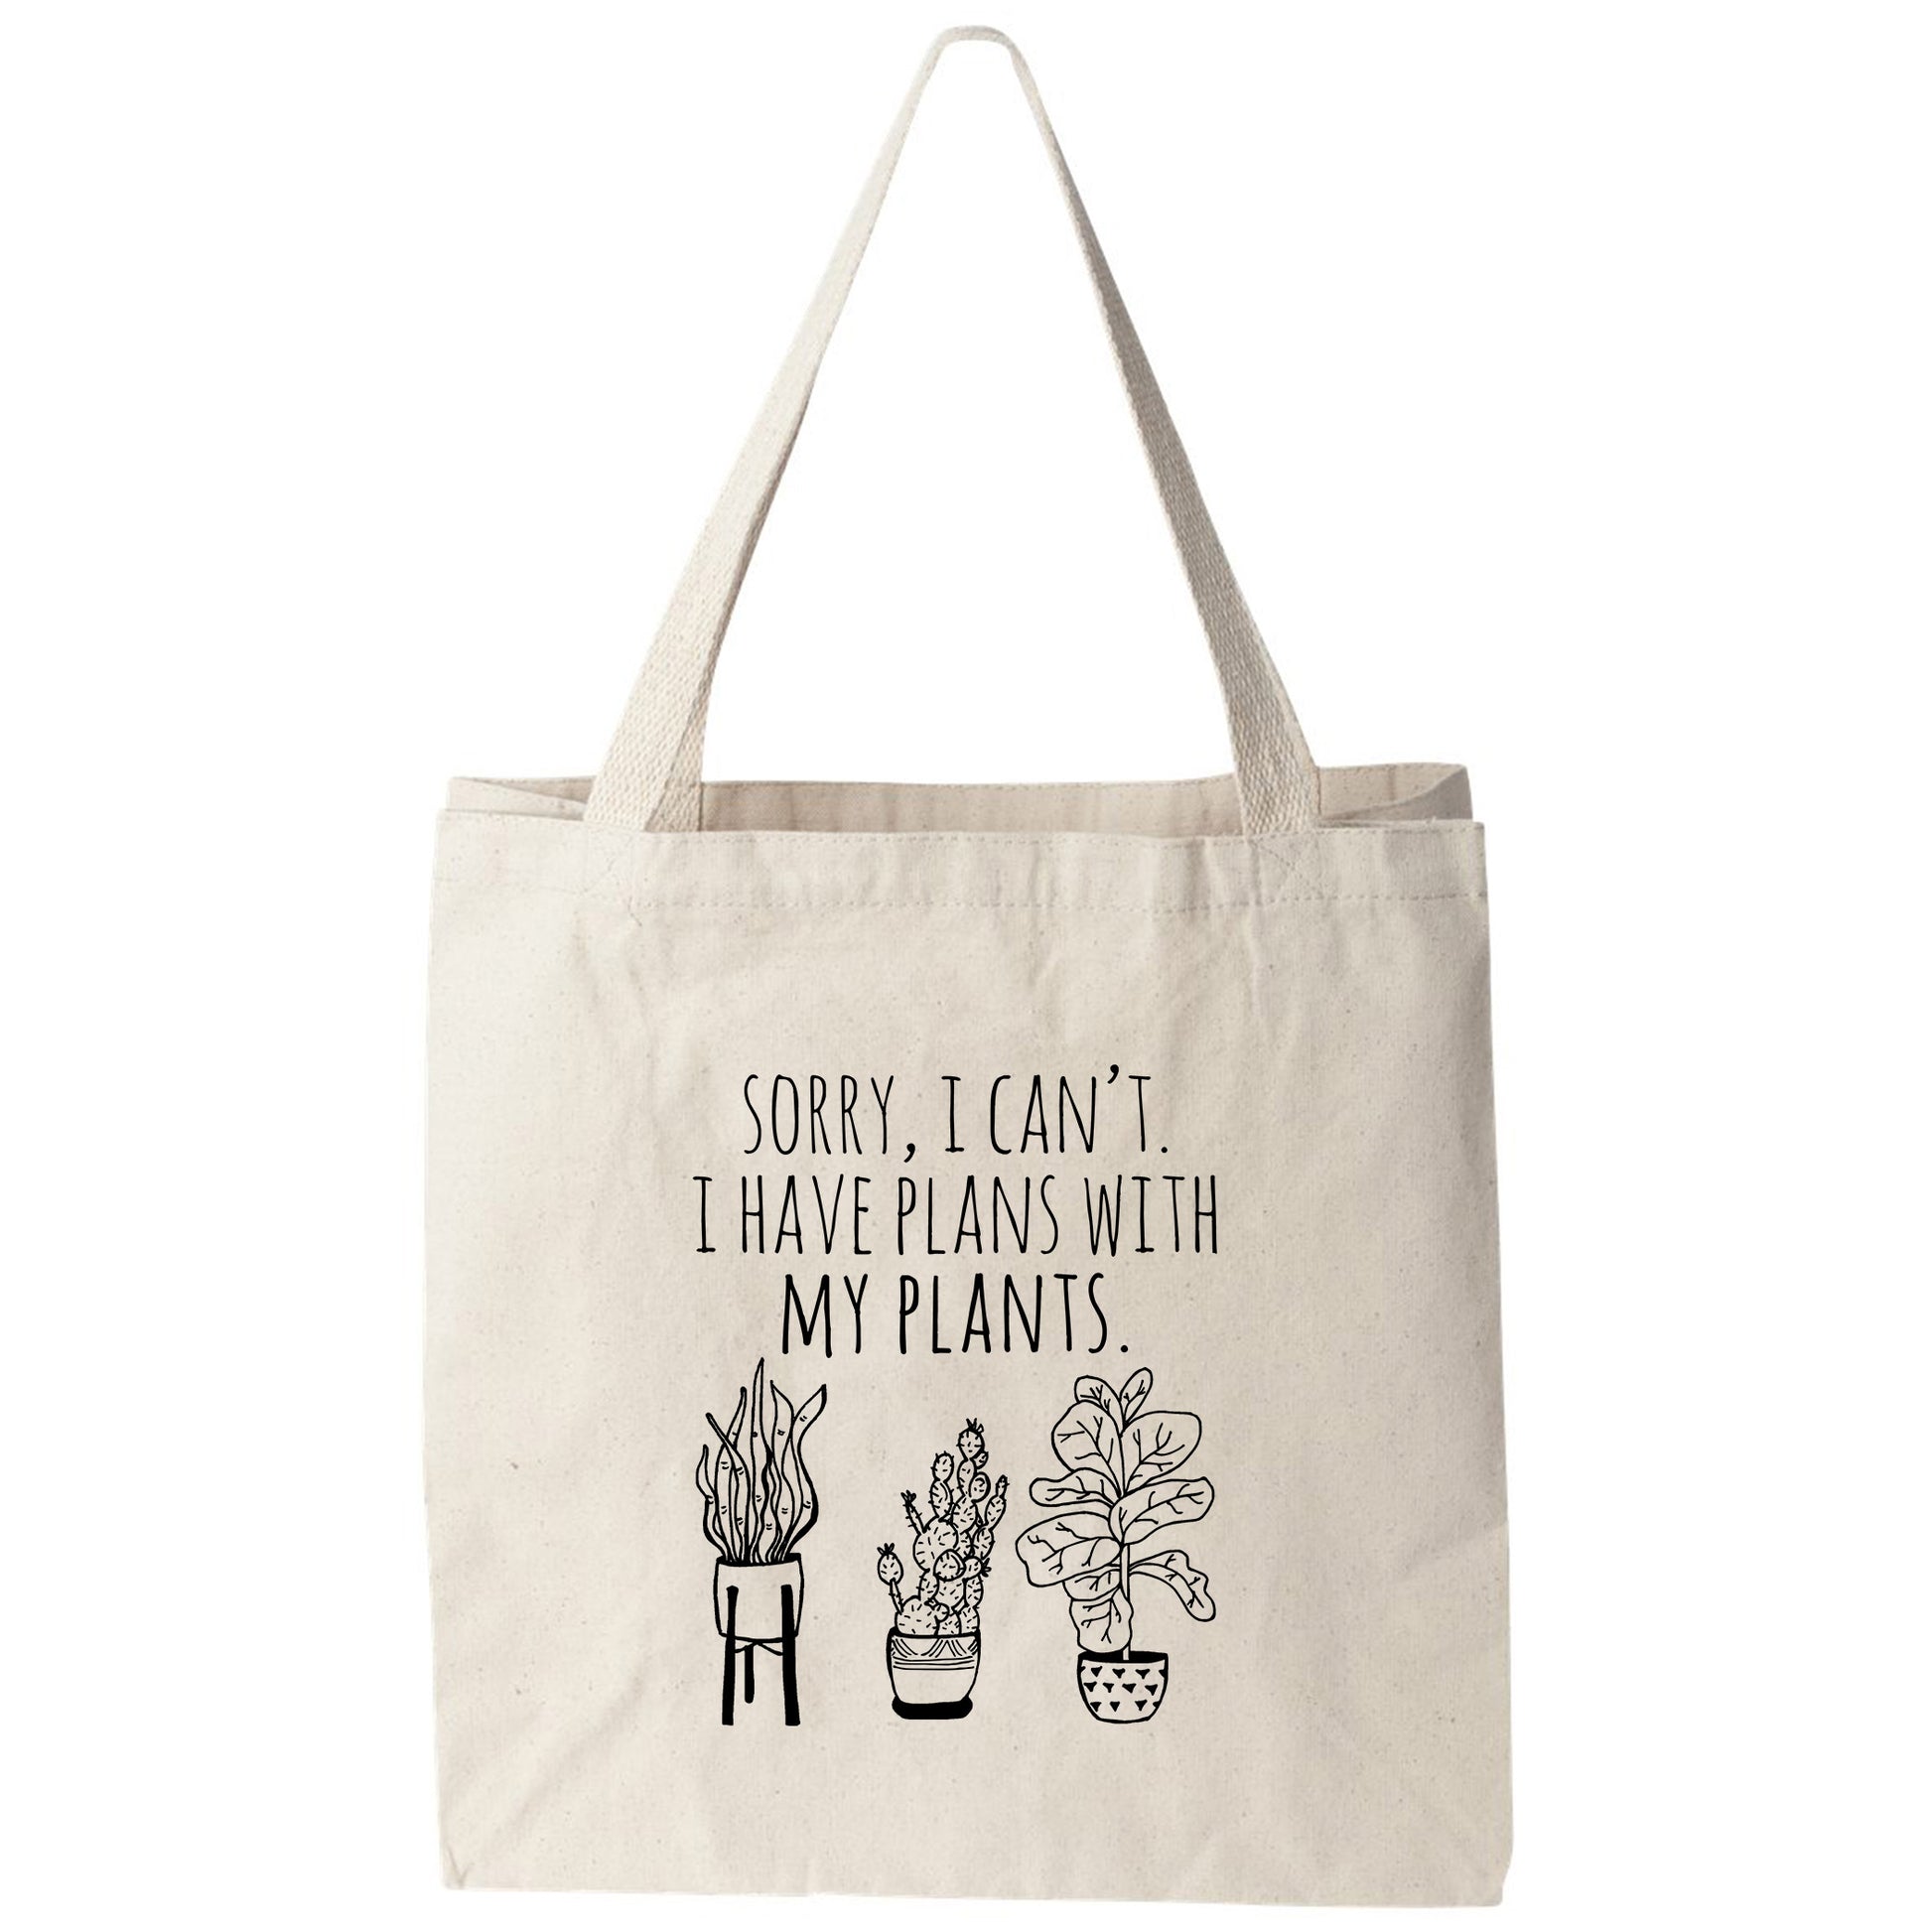 a tote bag that says sorry i can't i have plans with my